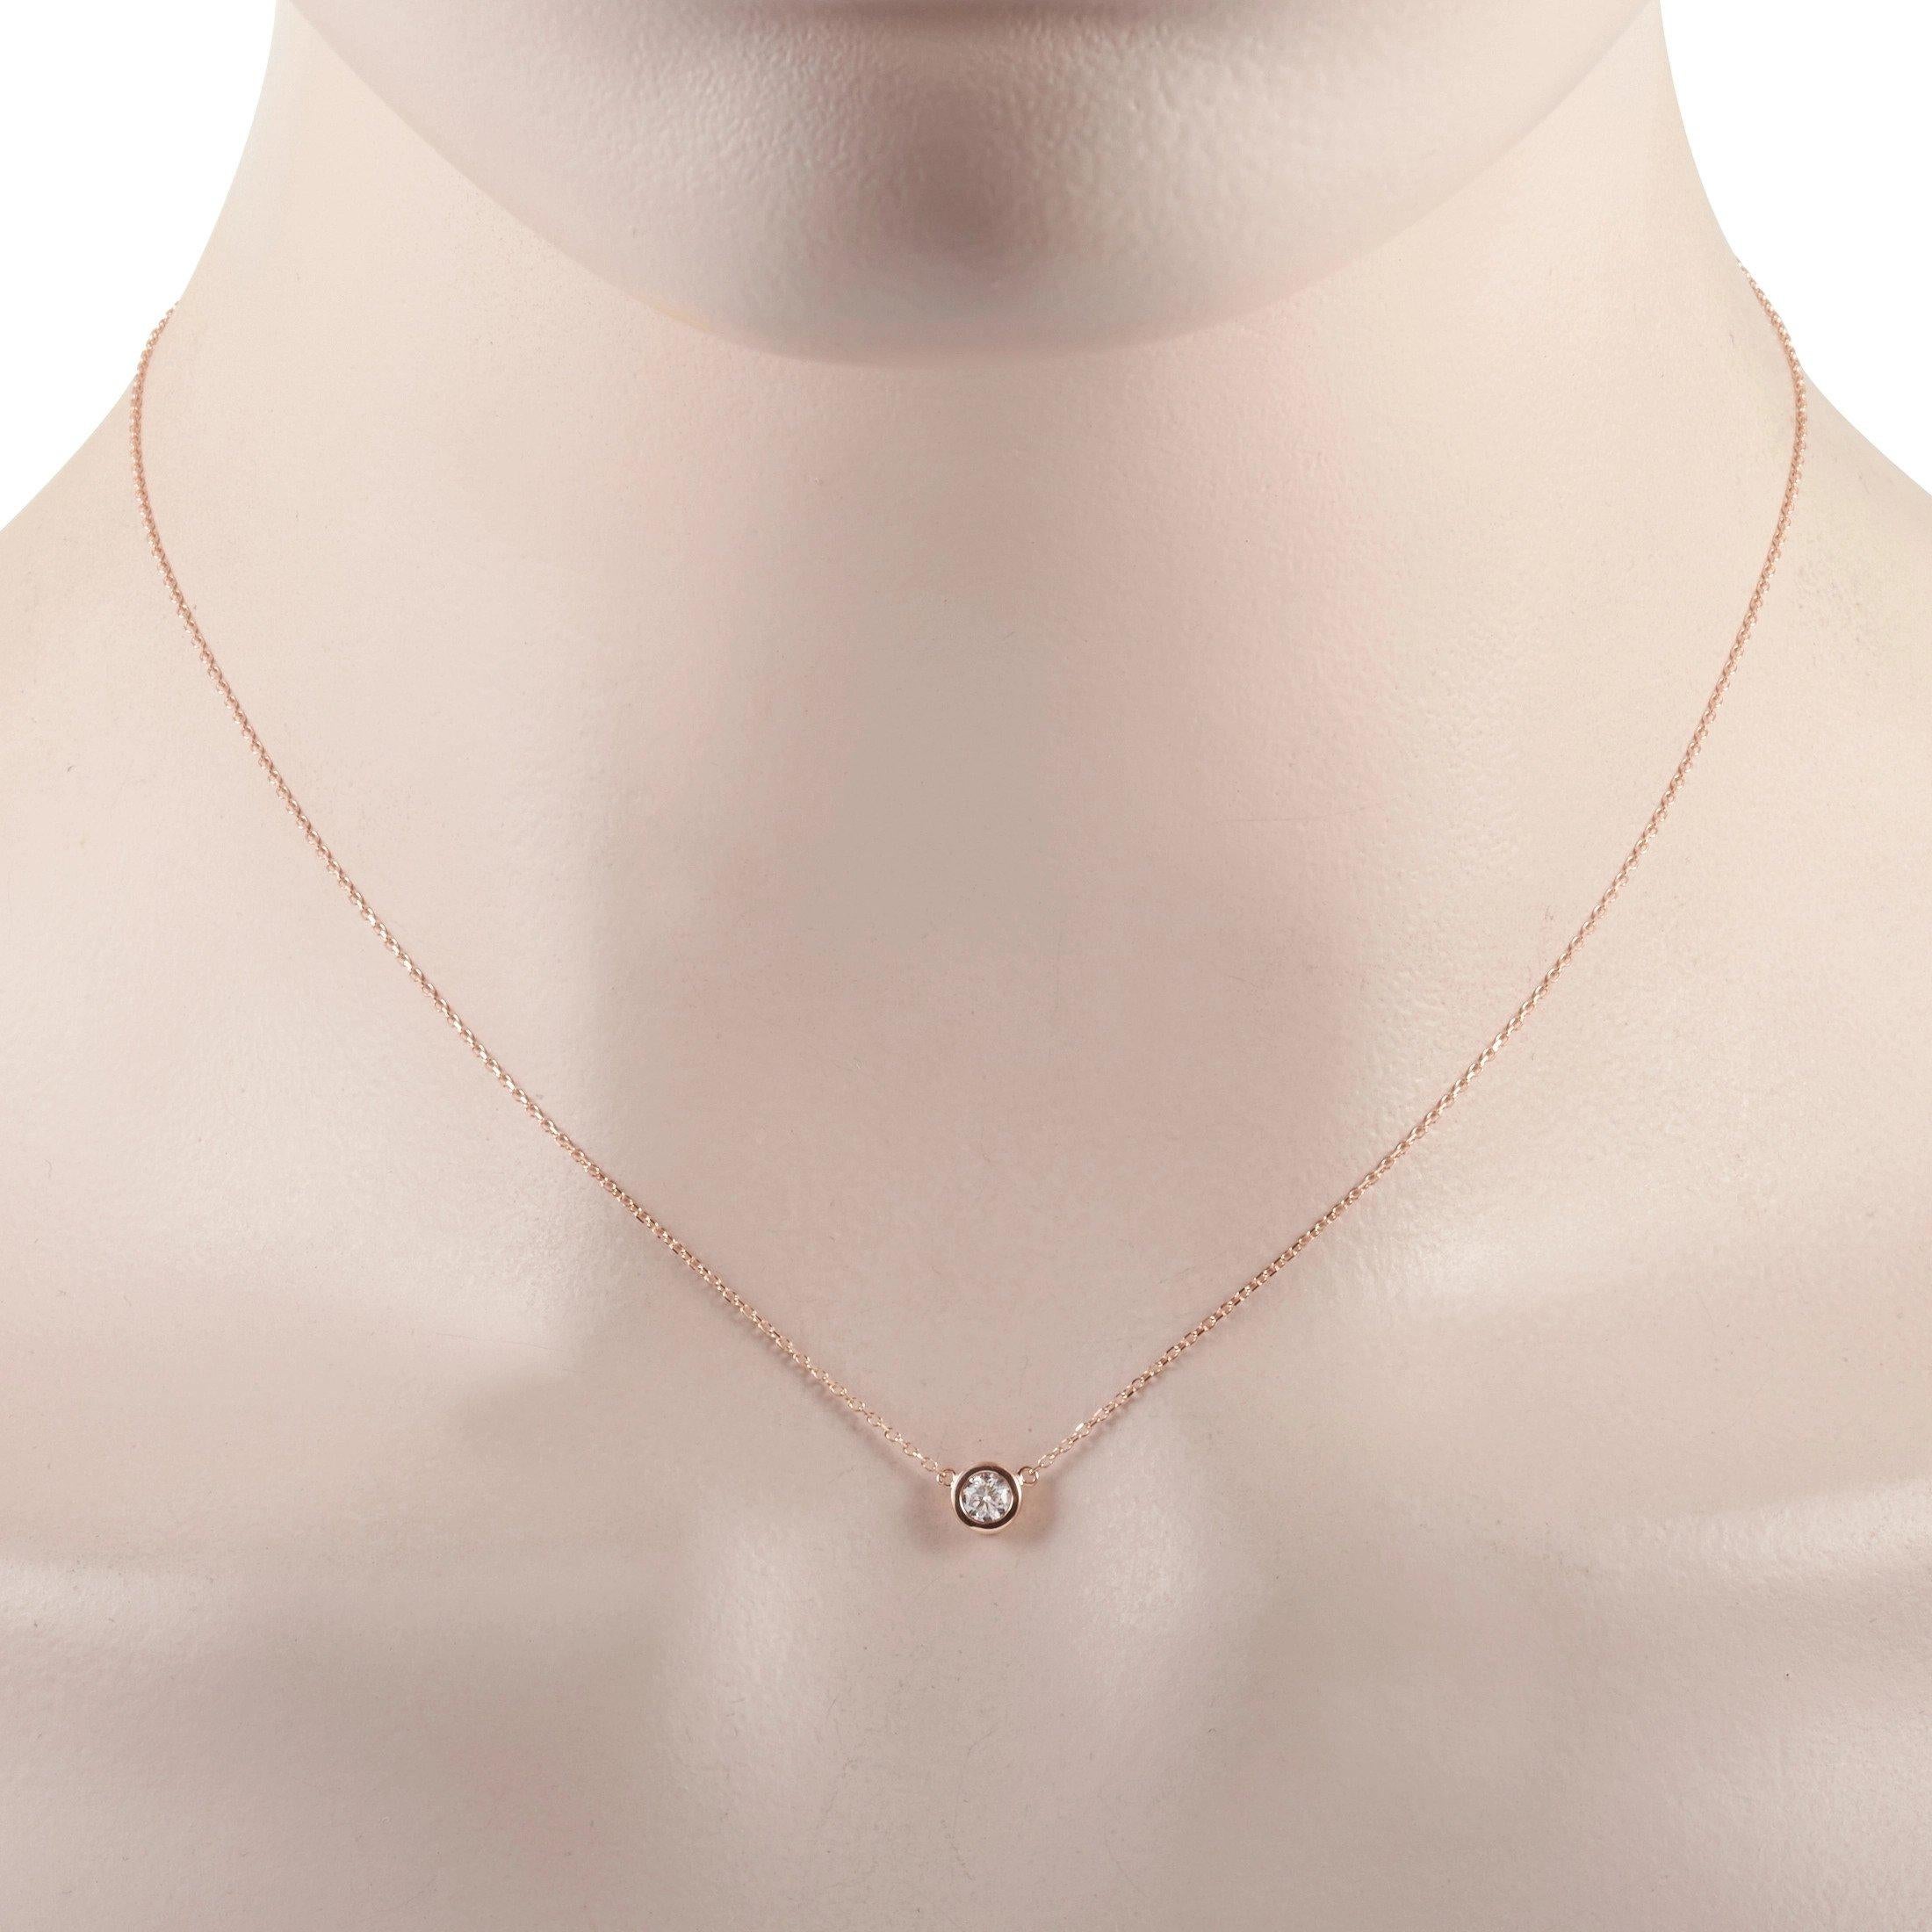 This LB Exclusive necklace is made of 14K rose gold and embellished with a 0.20 ct diamond stone. The necklace weighs 1.4 grams and boasts a 15” chain and a pendant that measures 0.13” in length and 0.13” in width.
 
 Offered in brand new condition,